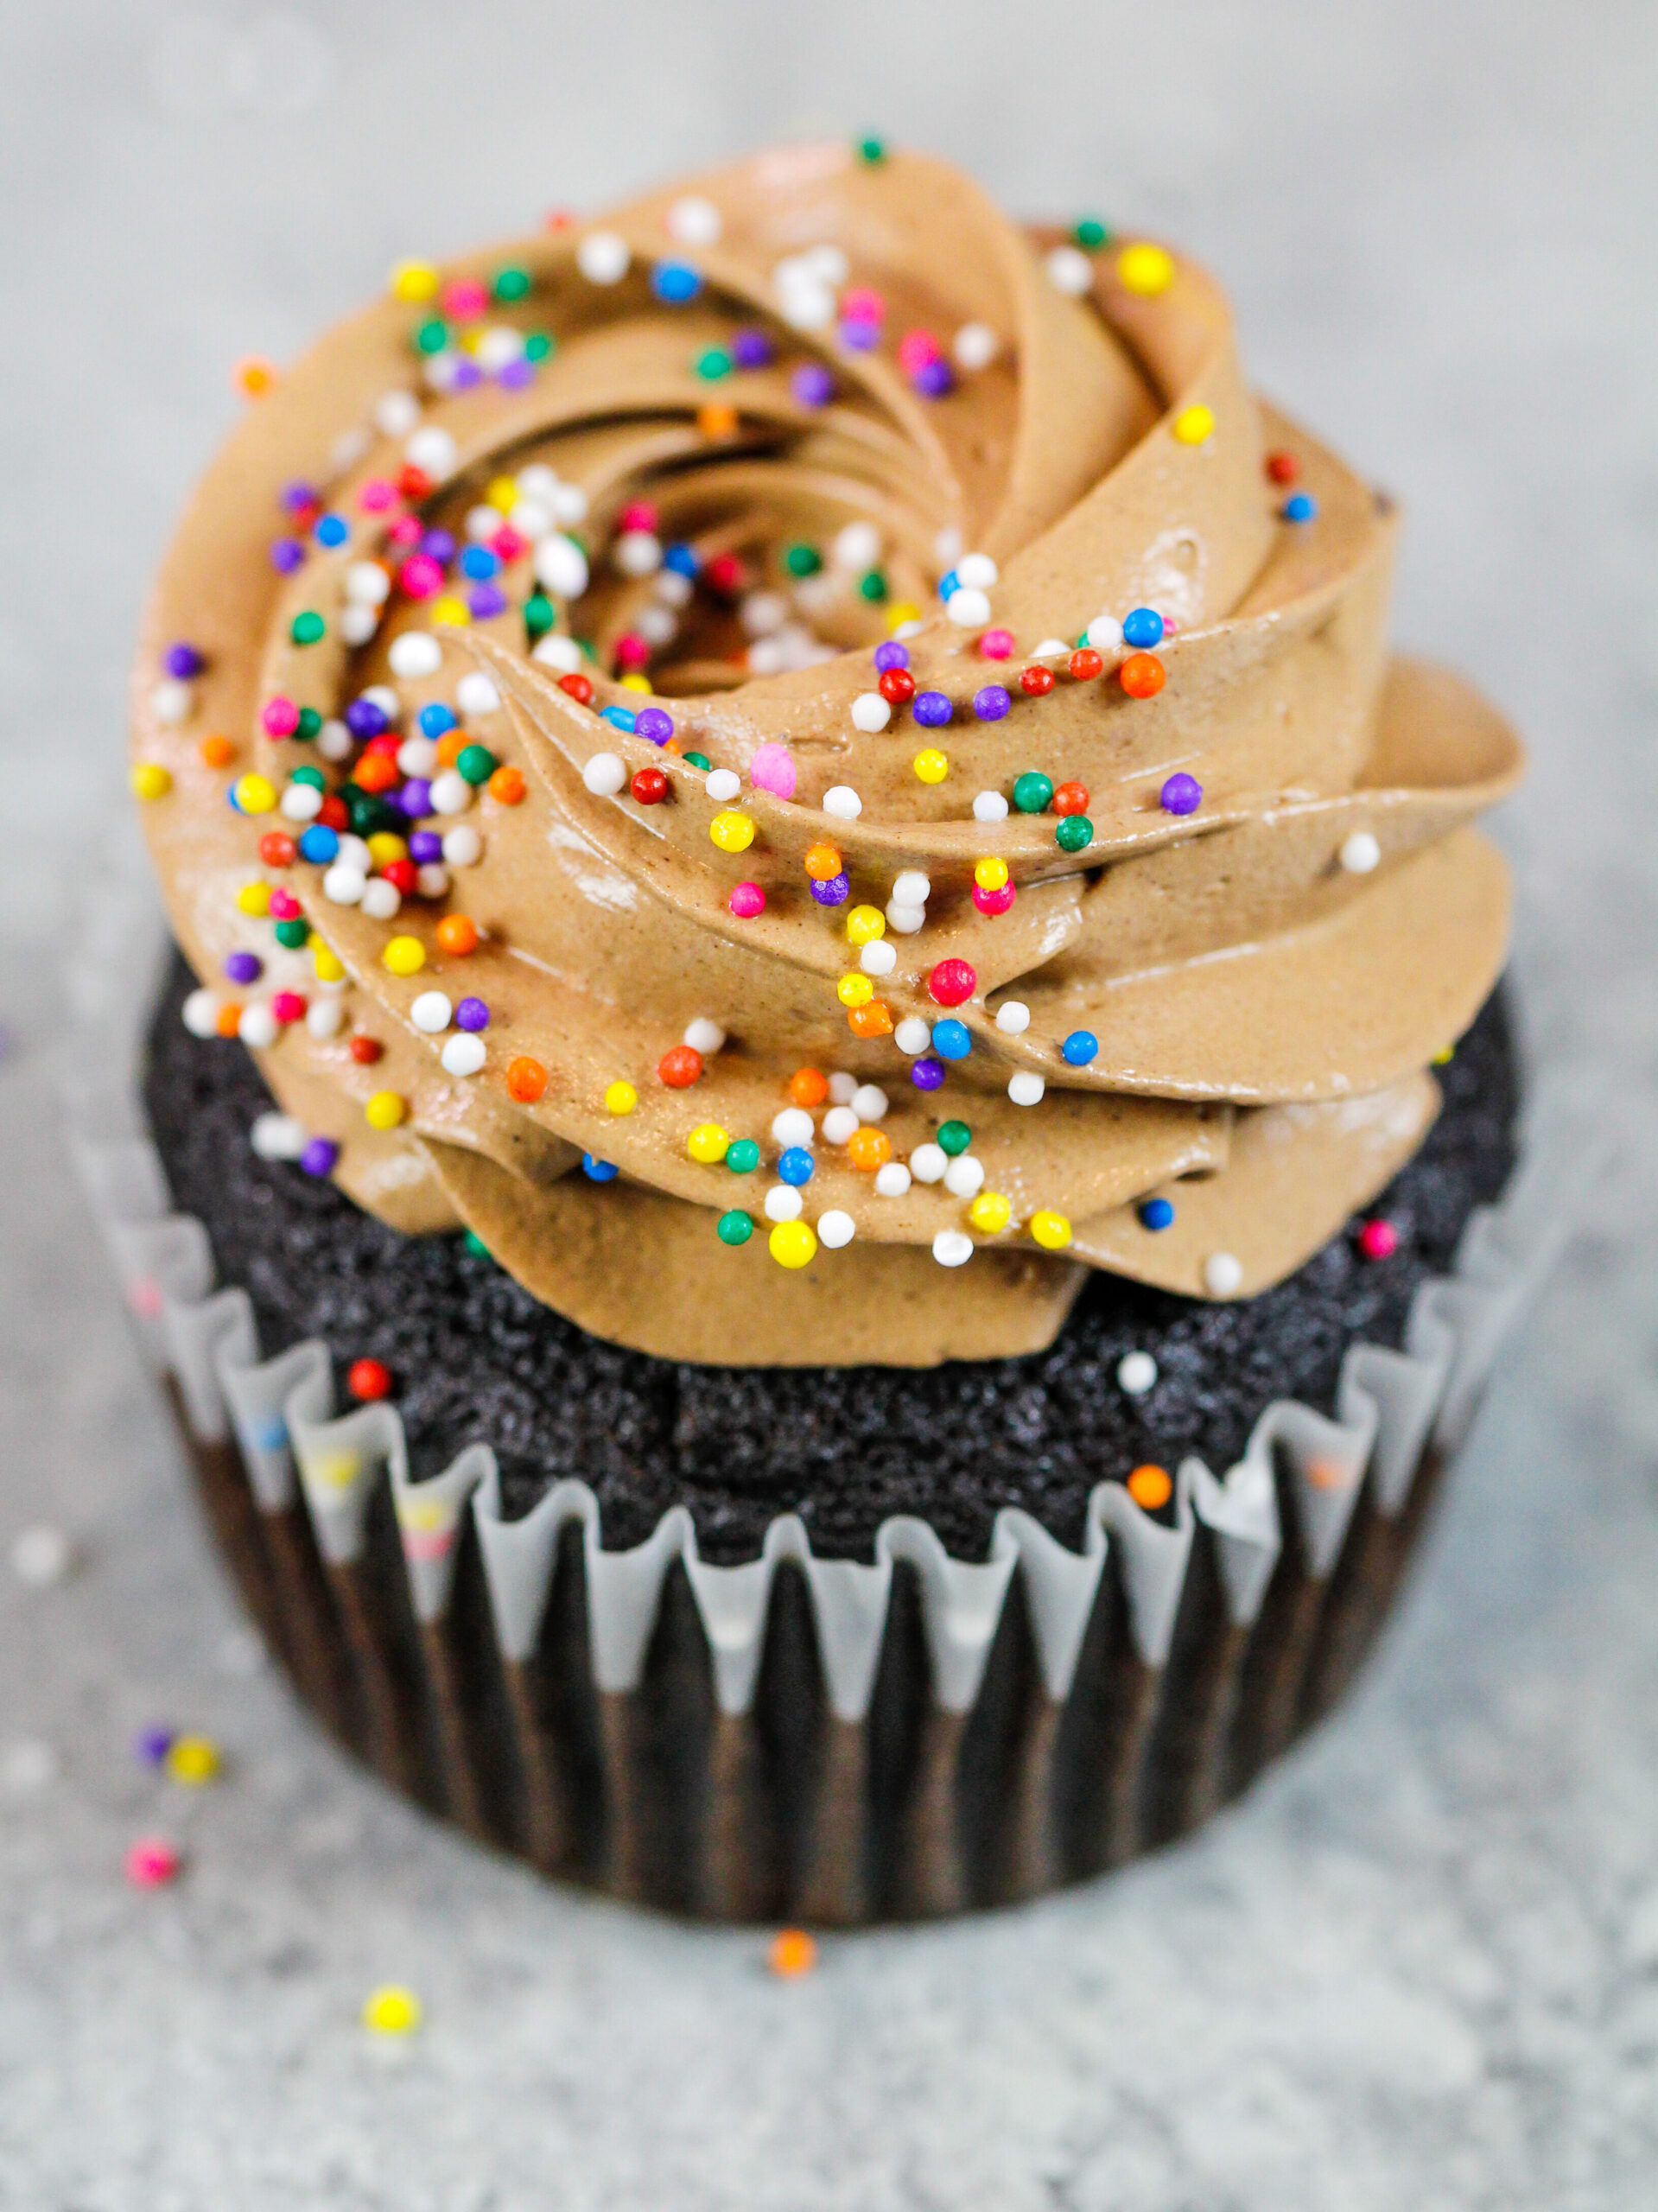 image of a chocolate cupcake frosted with delicious chocolate Italian meringue buttercream